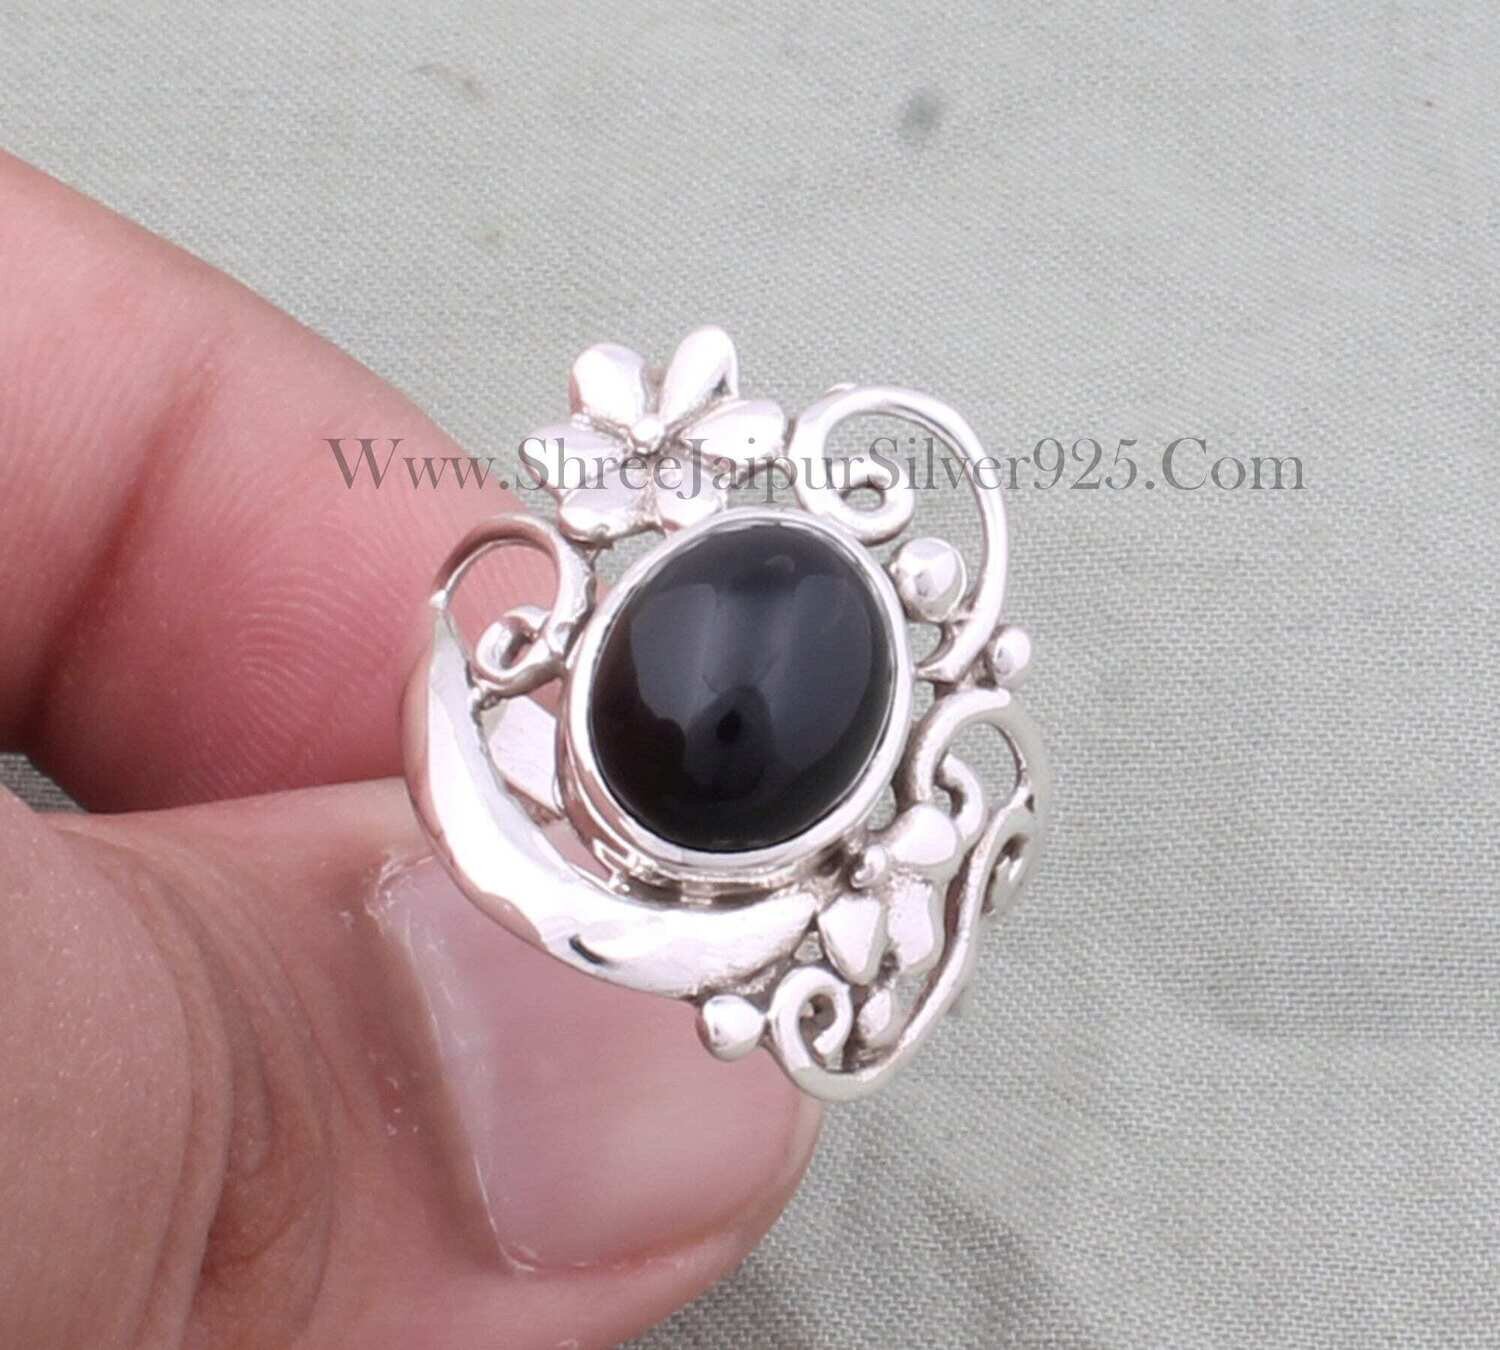 925 Sterling Silver Black Onyx Oval Gemstone Silver Ring, Designer Hand Carved Flower Silver Ring, Women Jewelry Gift Idea